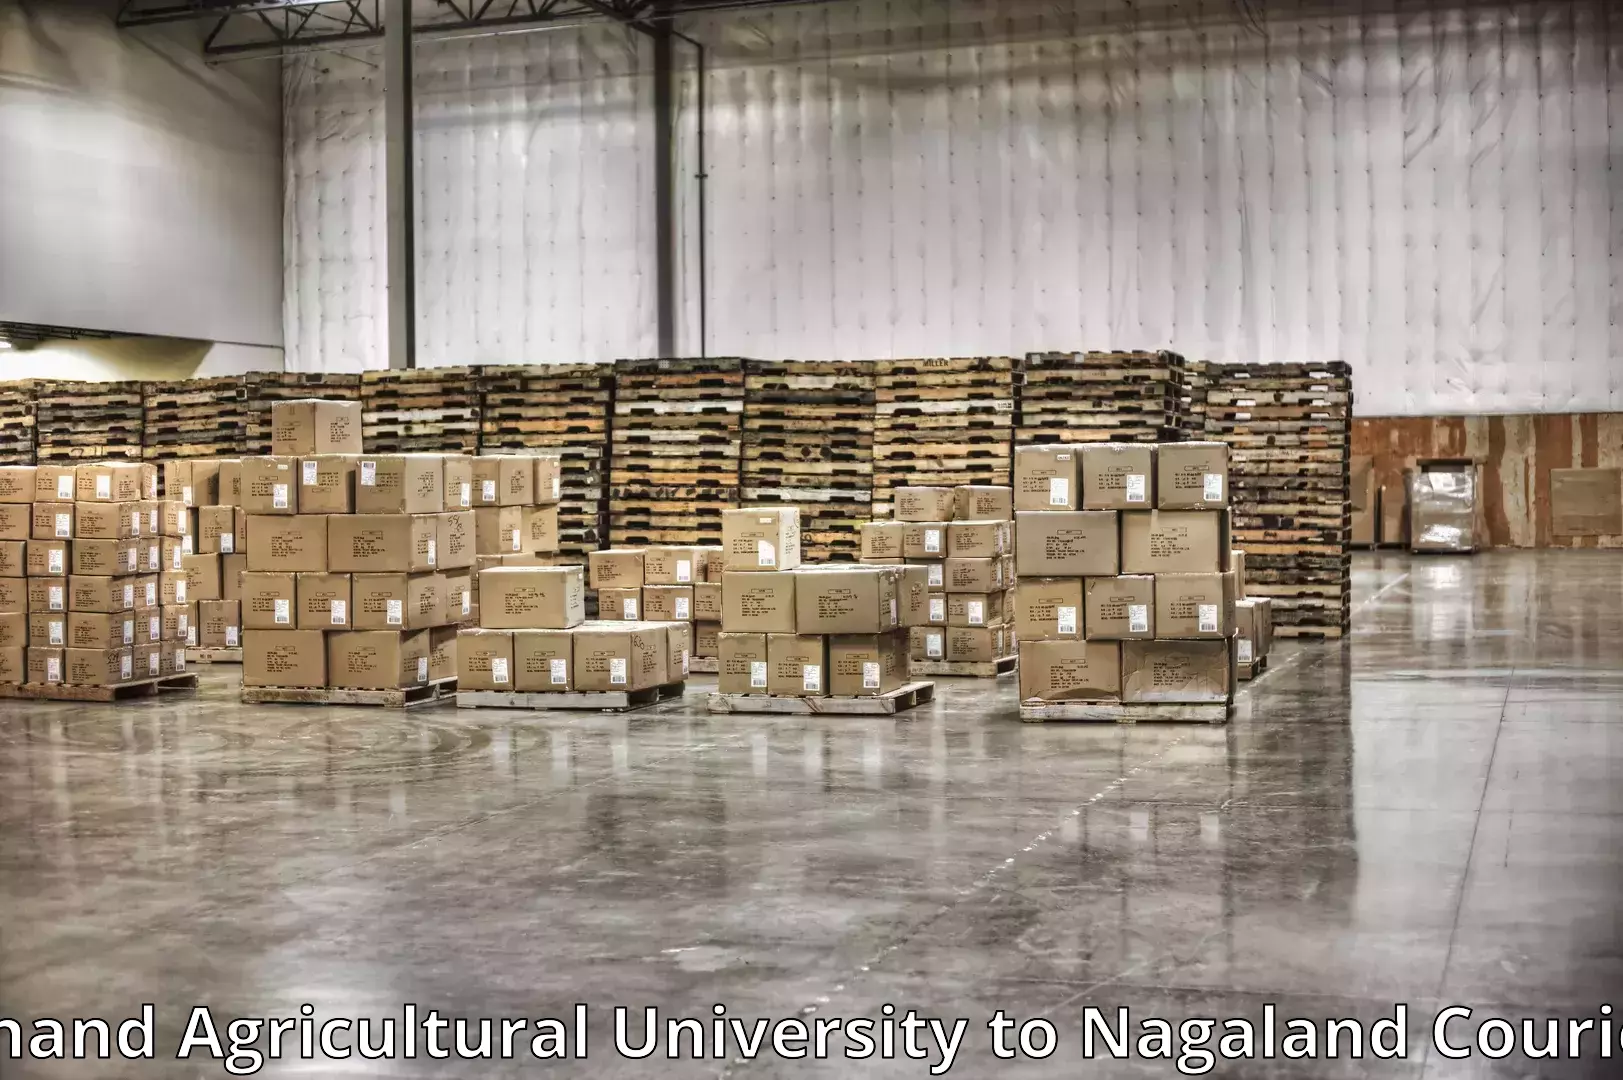 Furniture transport services Anand Agricultural University to Chumukedima